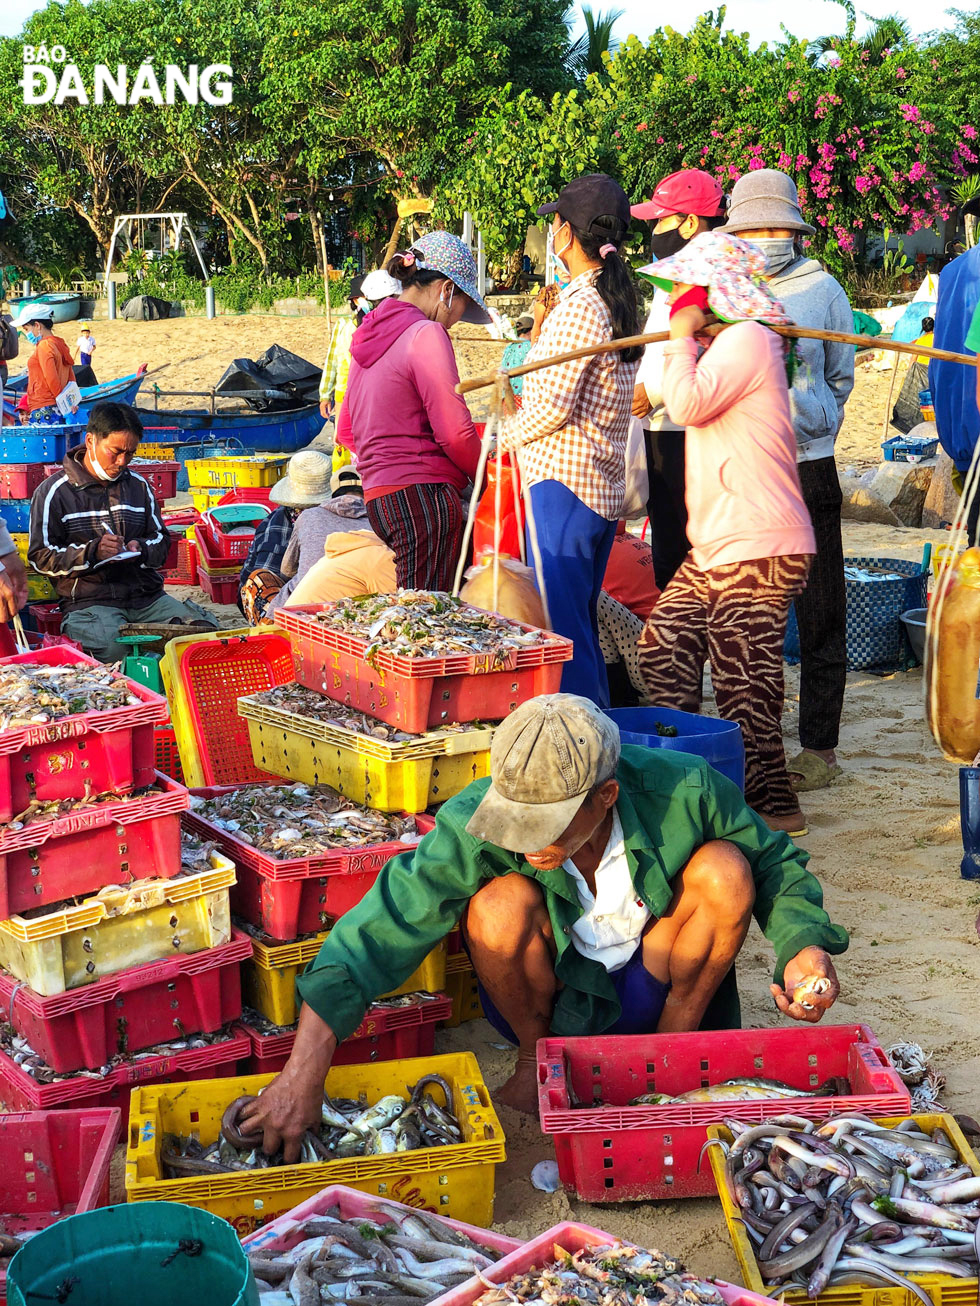 Trading activities here are only conducted by local villagers or traders to buy and distribute to seafood restaurants, so the scale is not large.